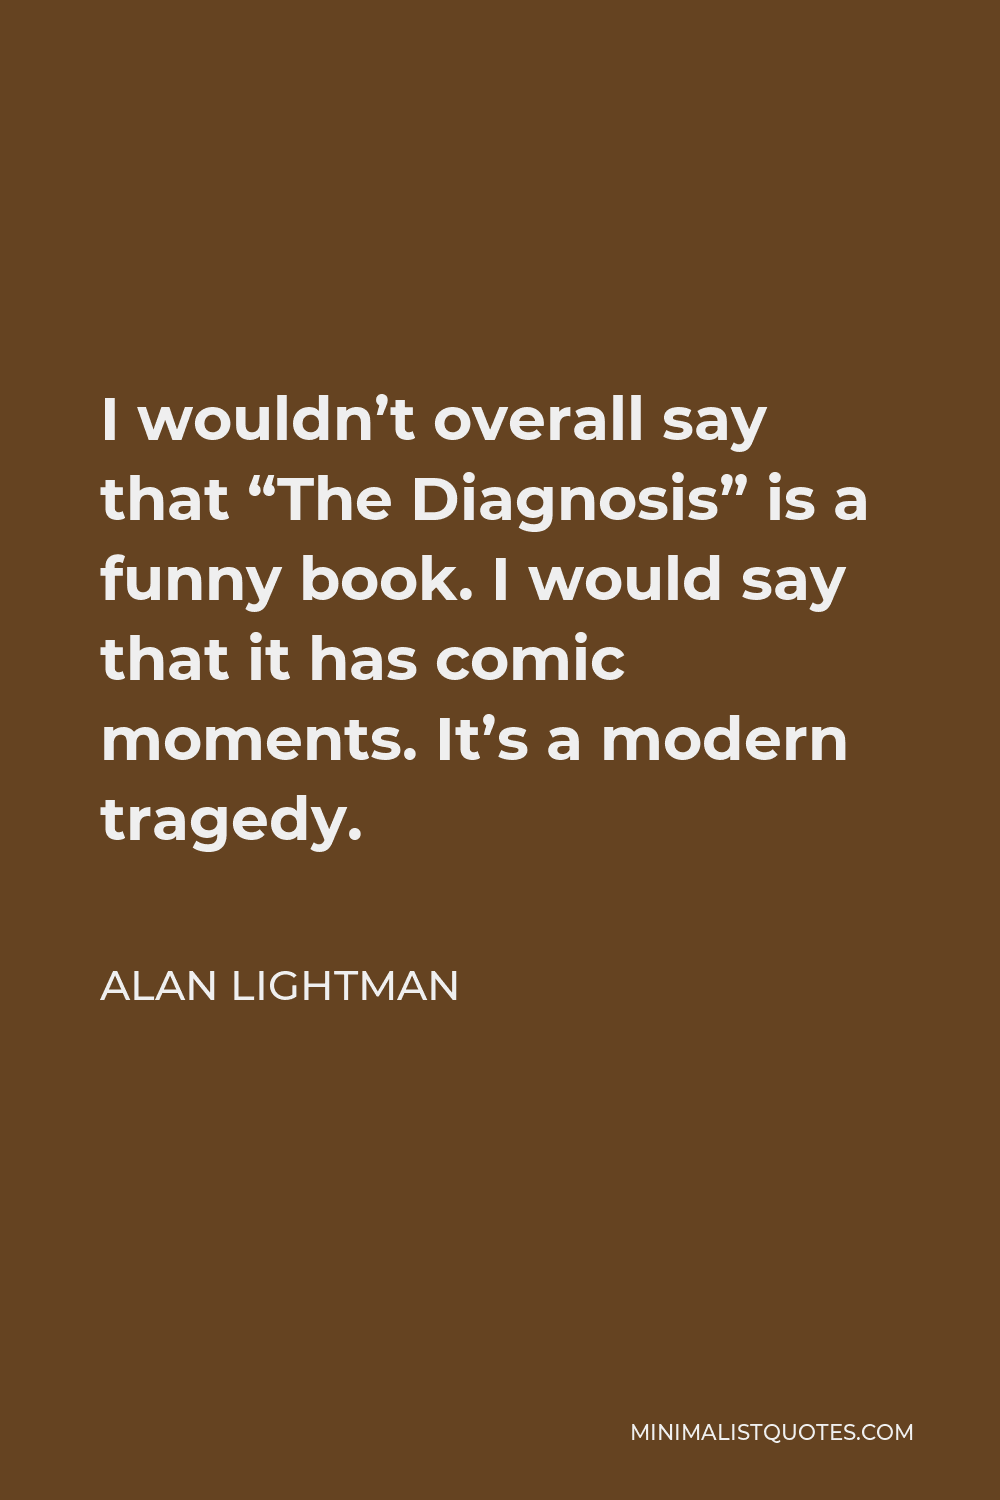 Alan Lightman Quote - I wouldn’t overall say that “The Diagnosis” is a funny book. I would say that it has comic moments. It’s a modern tragedy.